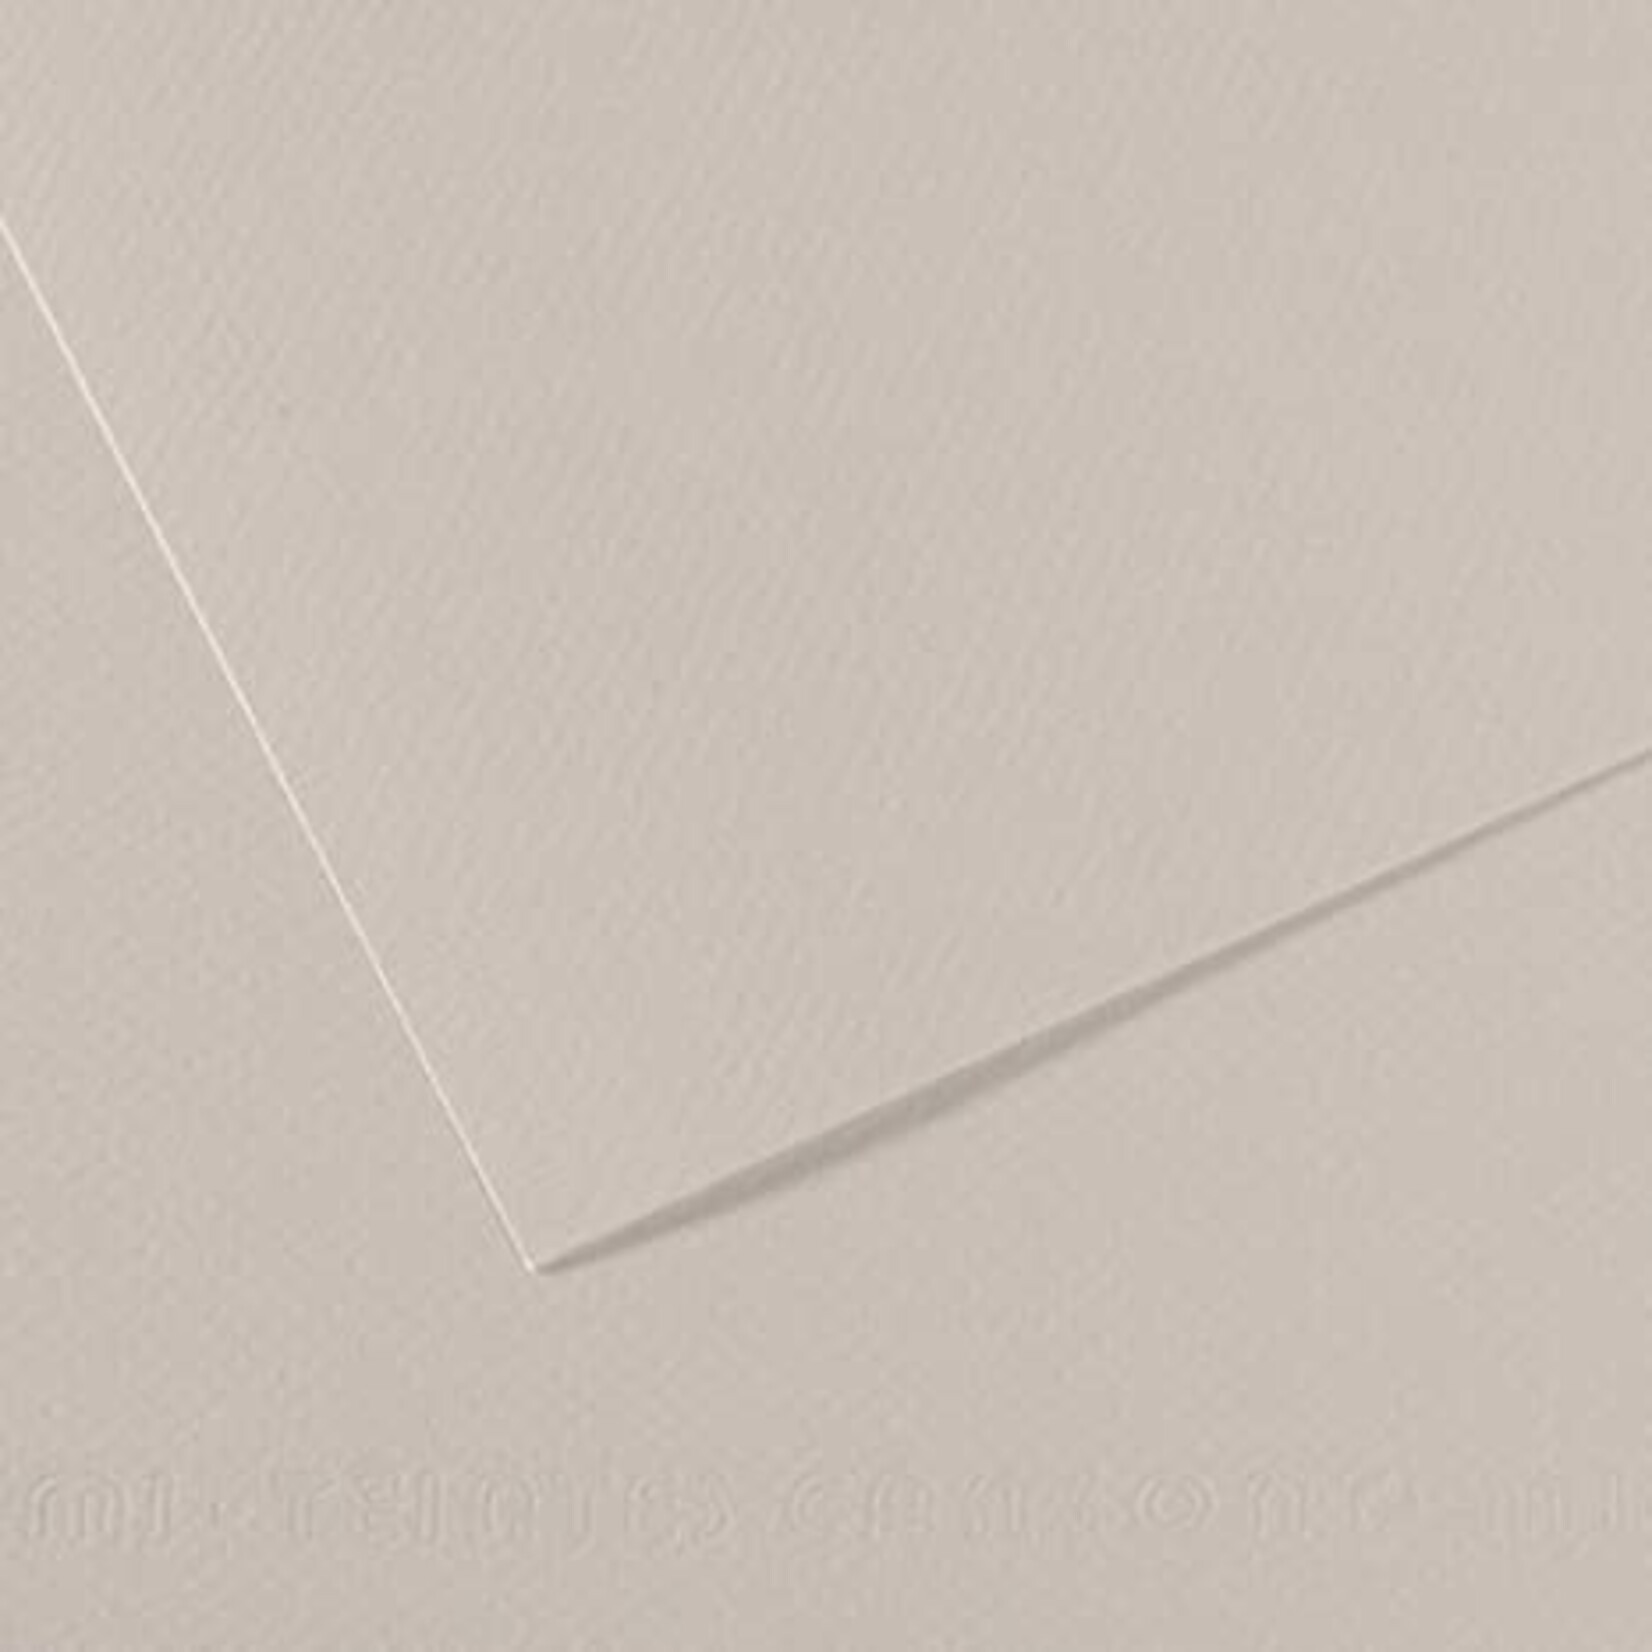 Canson Mi-Teintes Paper Sheets, 19'' x 25'', Pearl Gray